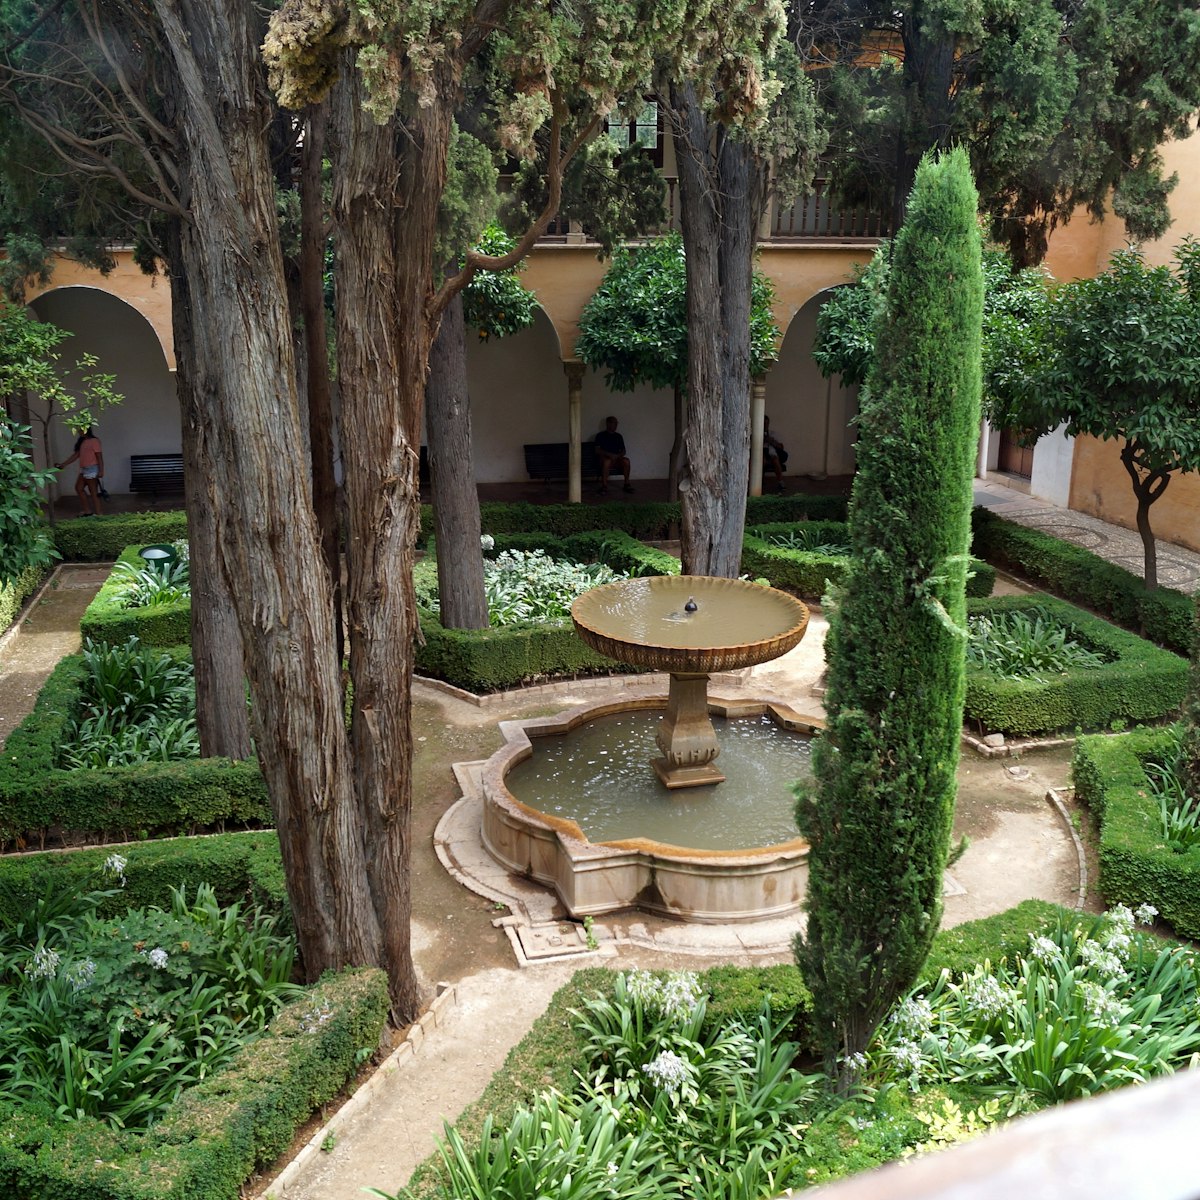 Patio de Lindaraja, 16th-century courtyard adjacent to the Palace of the Lions, in Alhambra, Granada, Spain.